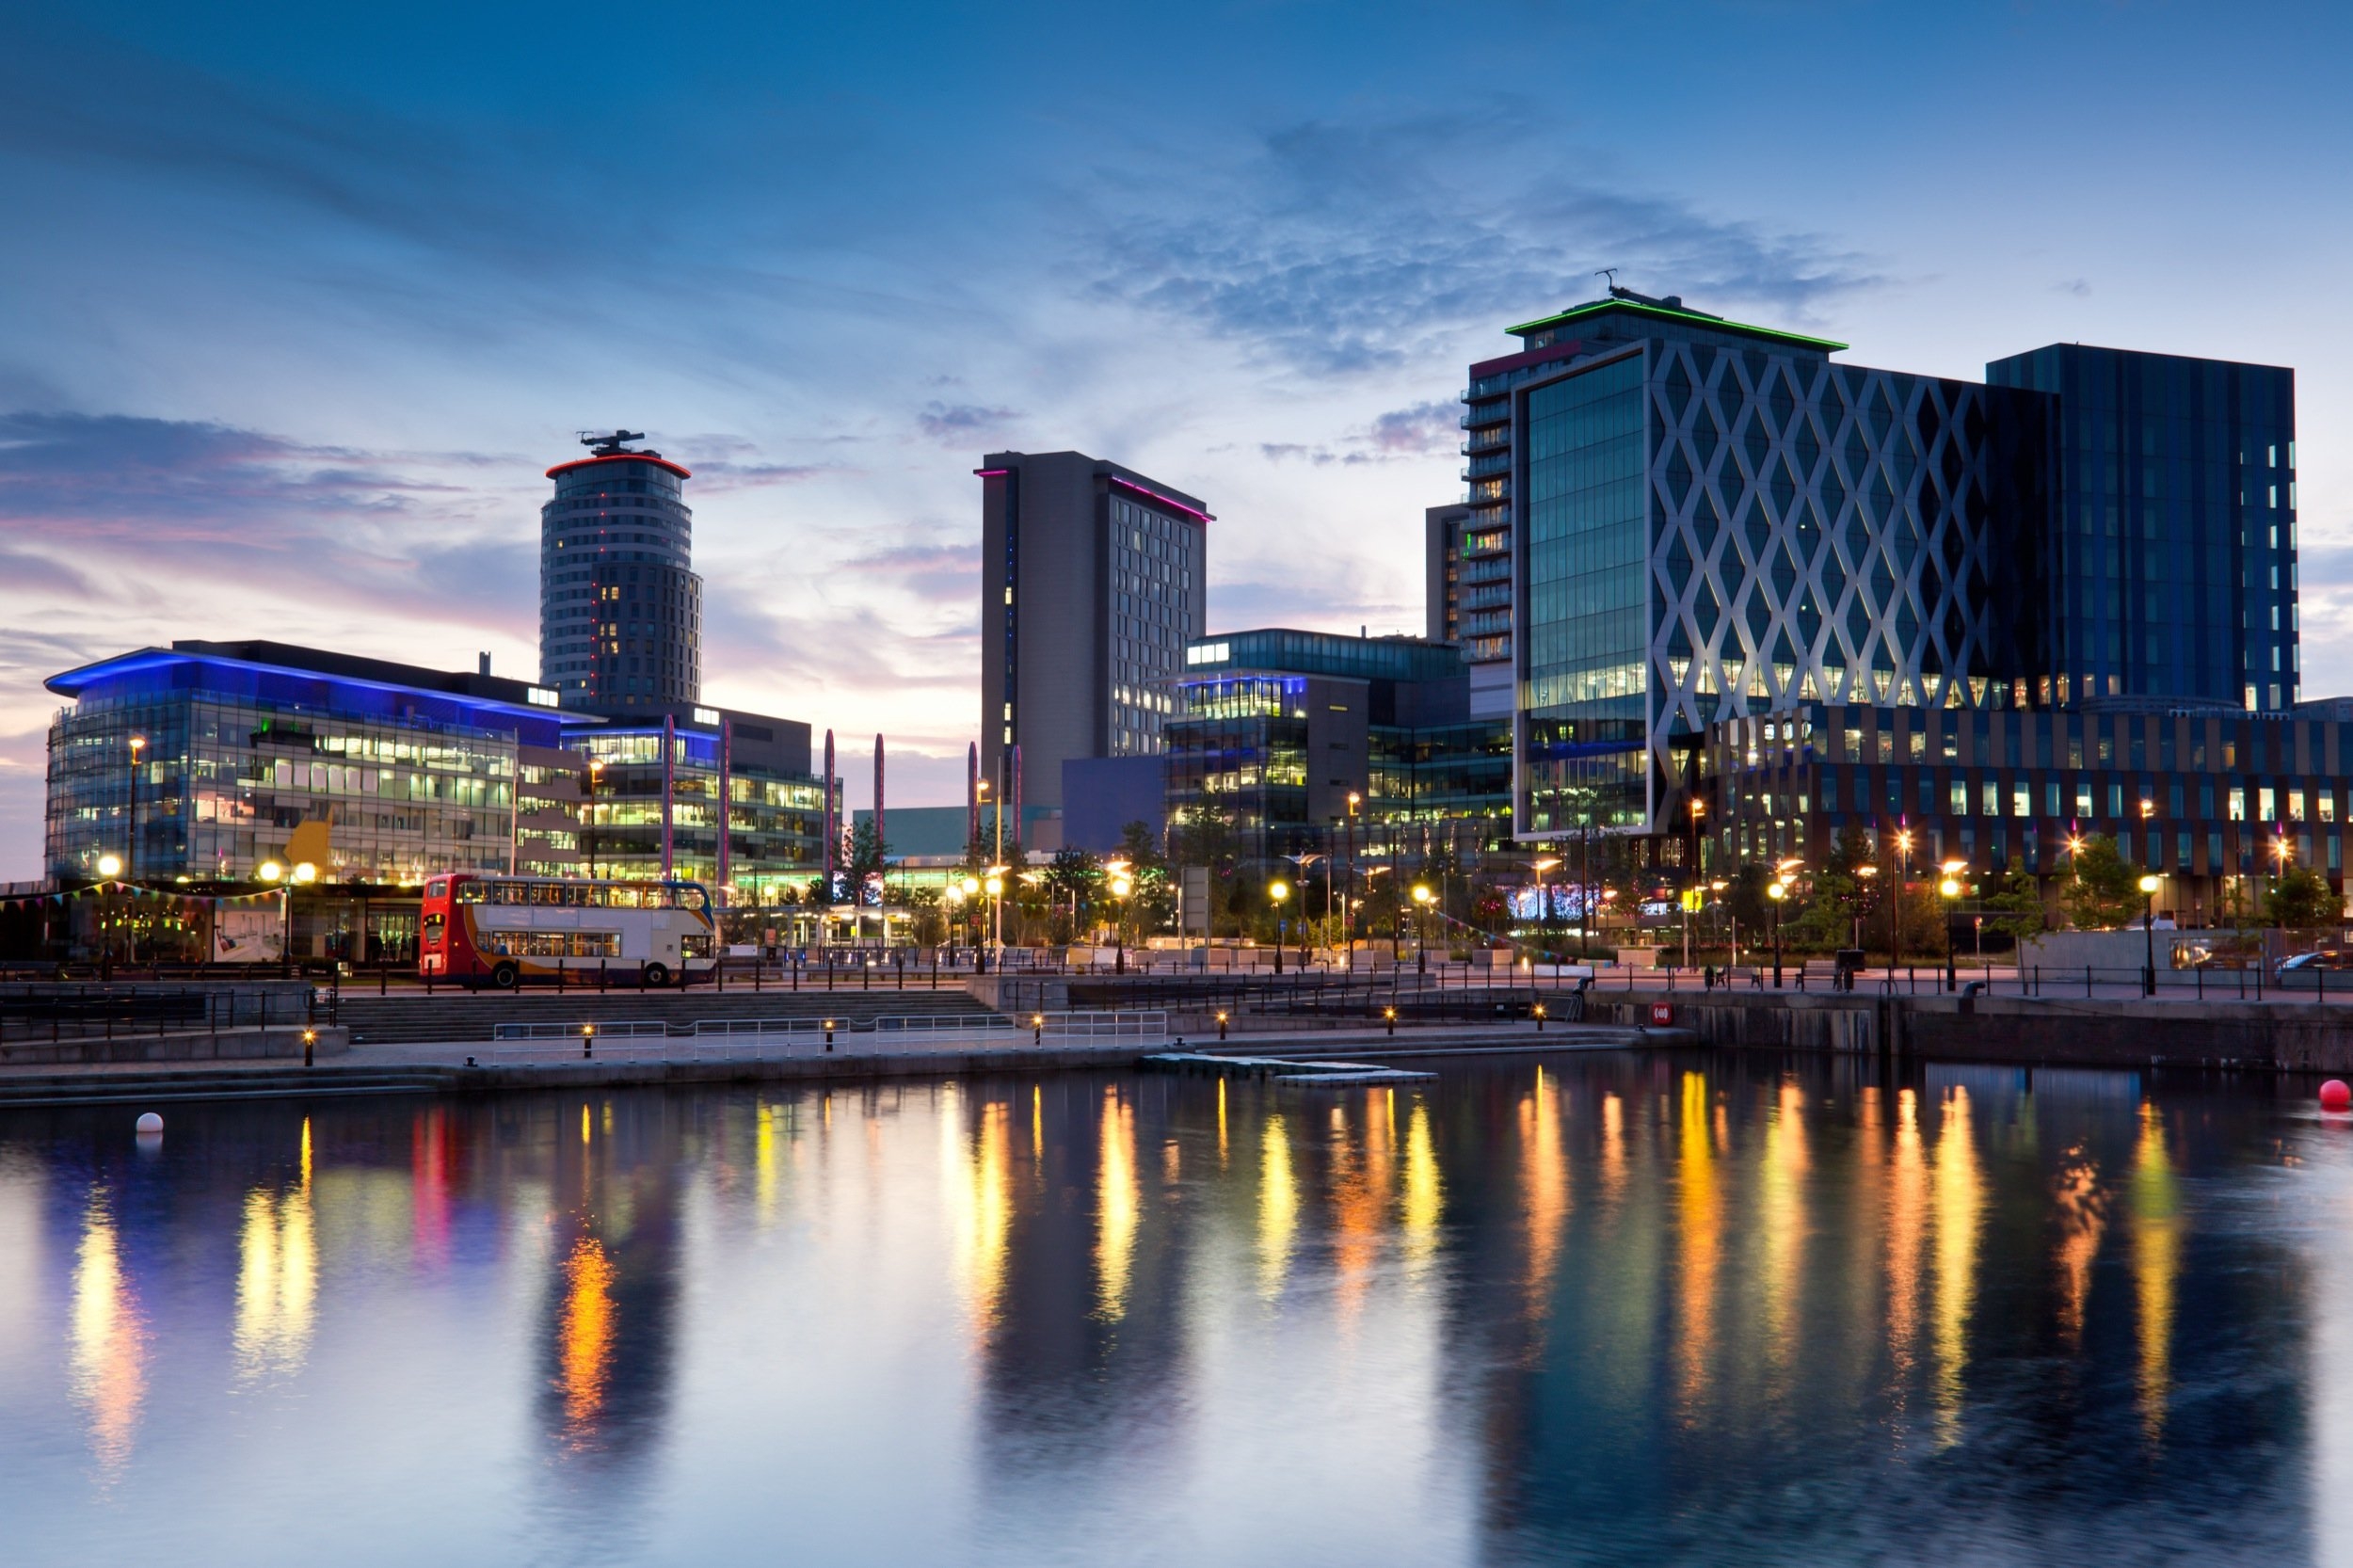 why invest in manchester property